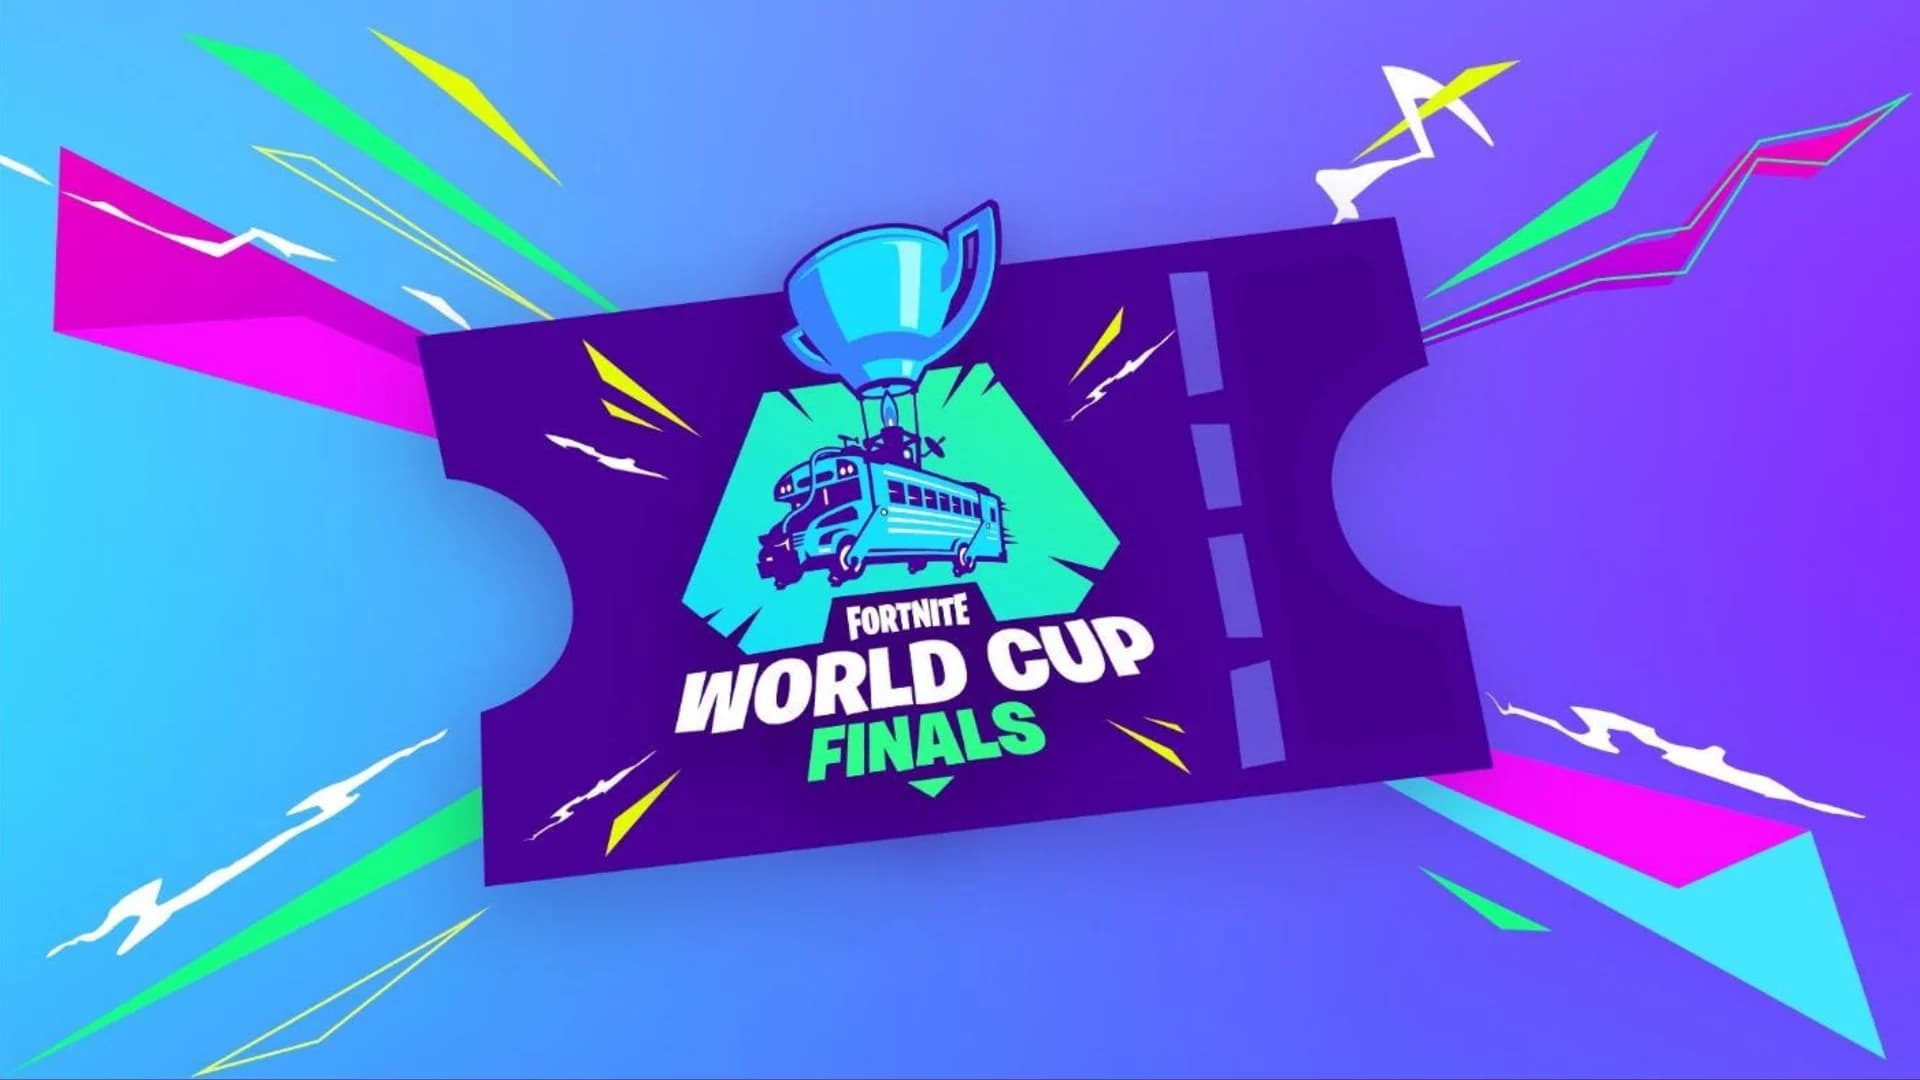 Esports come to New York with first-ever Fortnite World Cup tournament